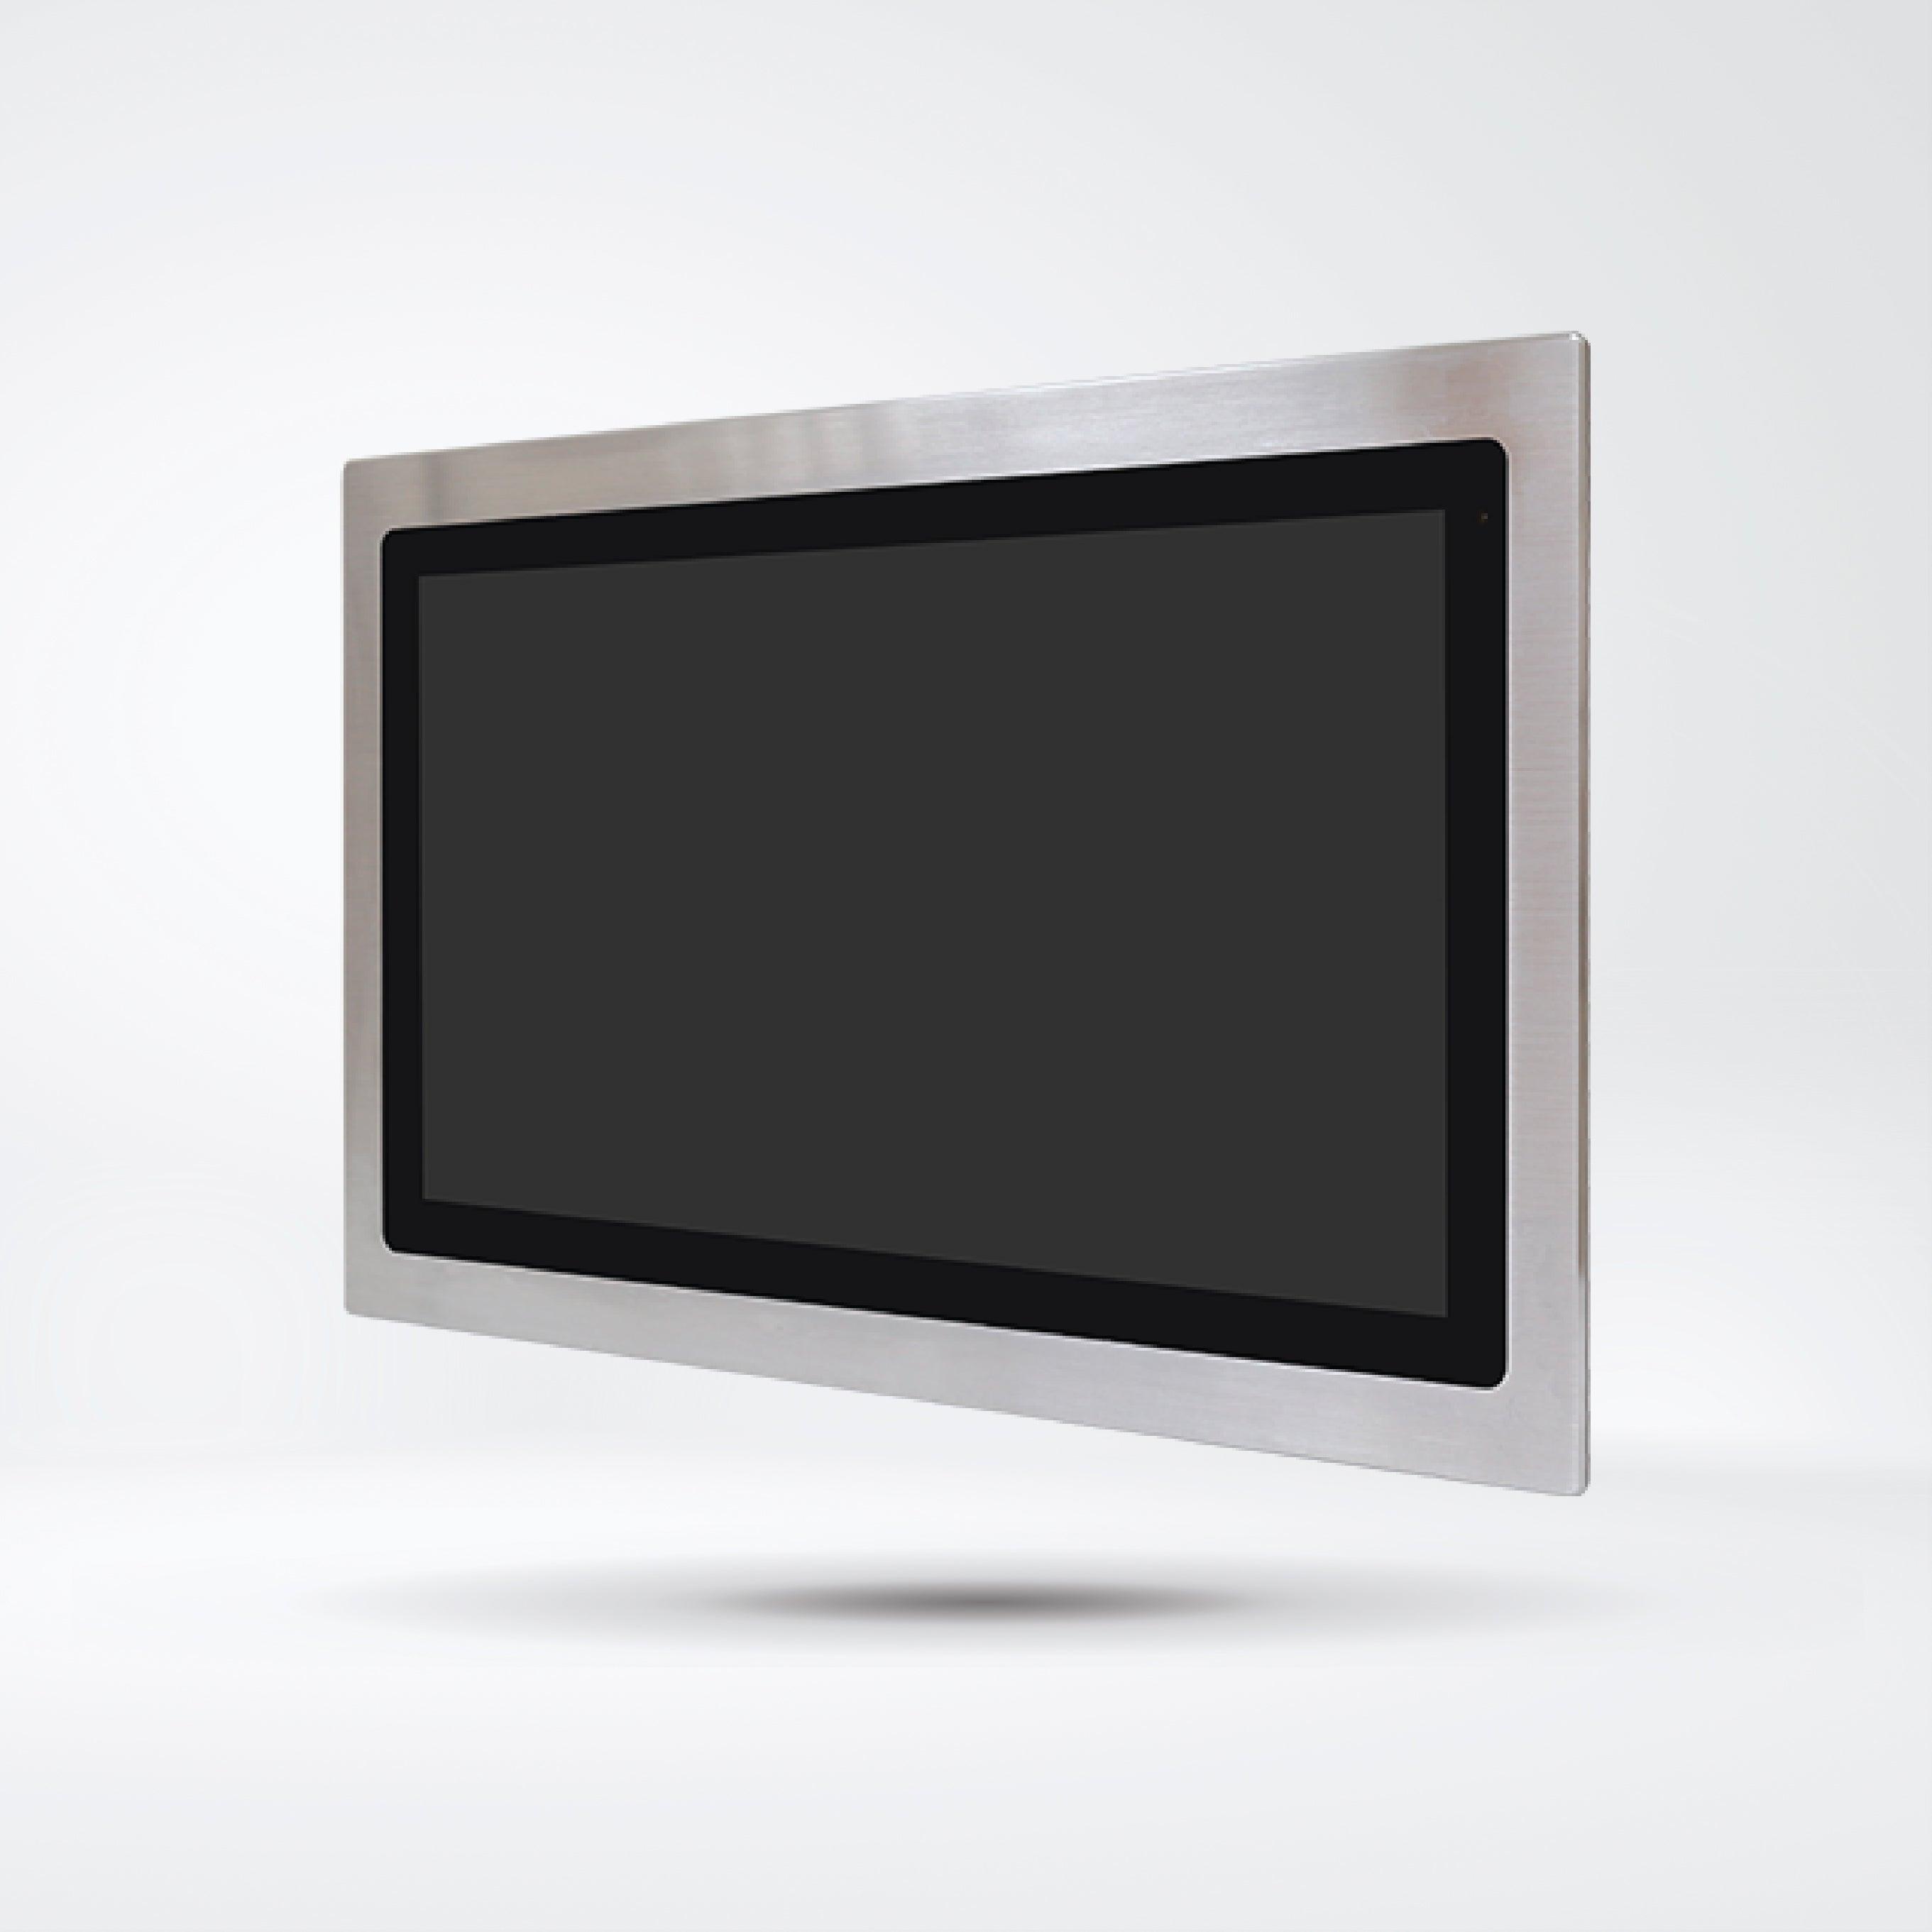 FABS-121G 21.5” Flat Front Panel IP66 Stainless Chassis Display - Riverplus